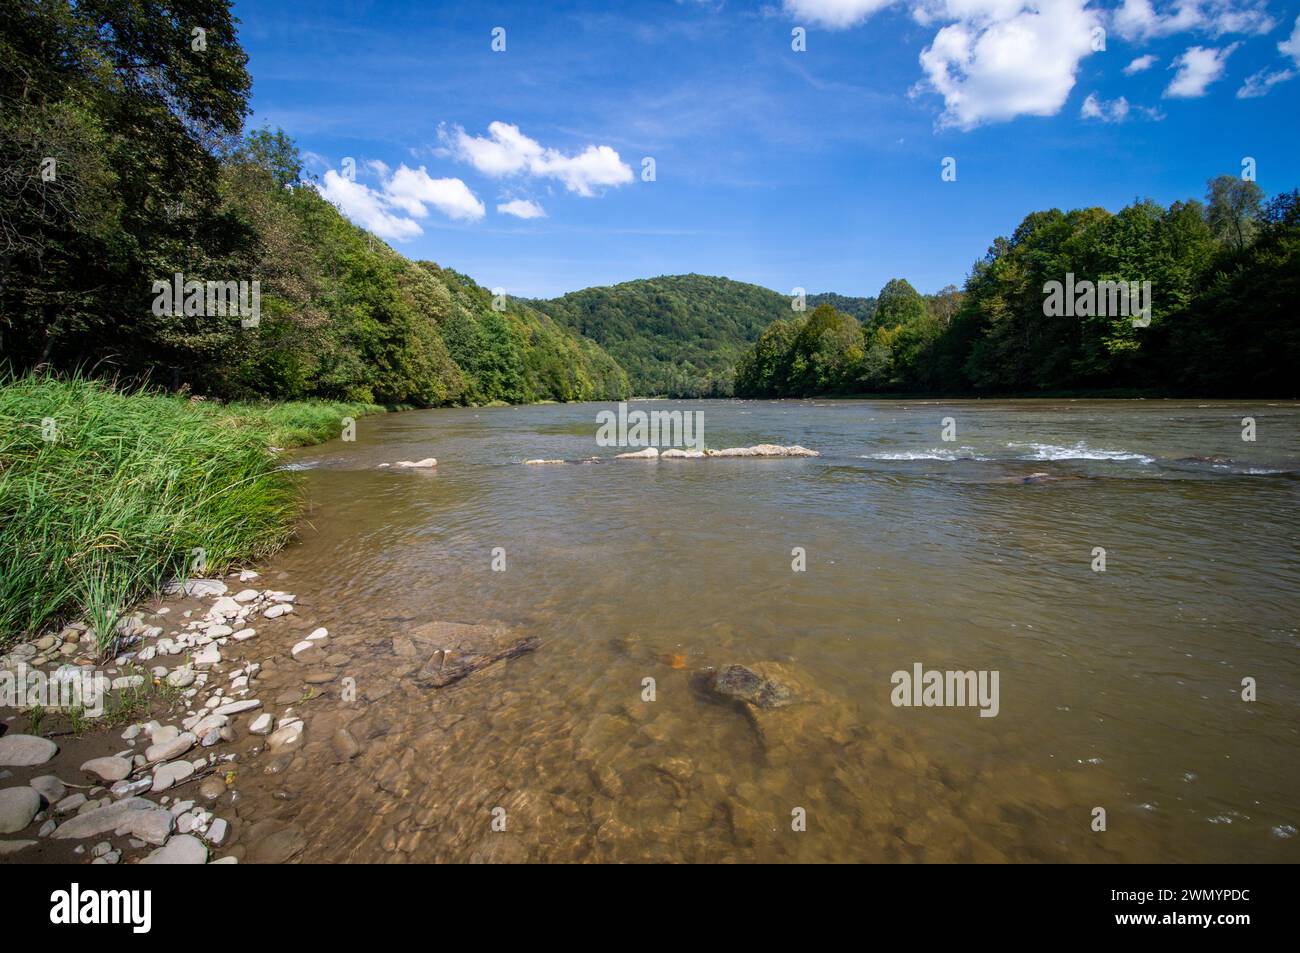 Shallow river with stones, San river valley in Bieszczady mountains, low mountain ridges covered with forest, late summer Stock Photo